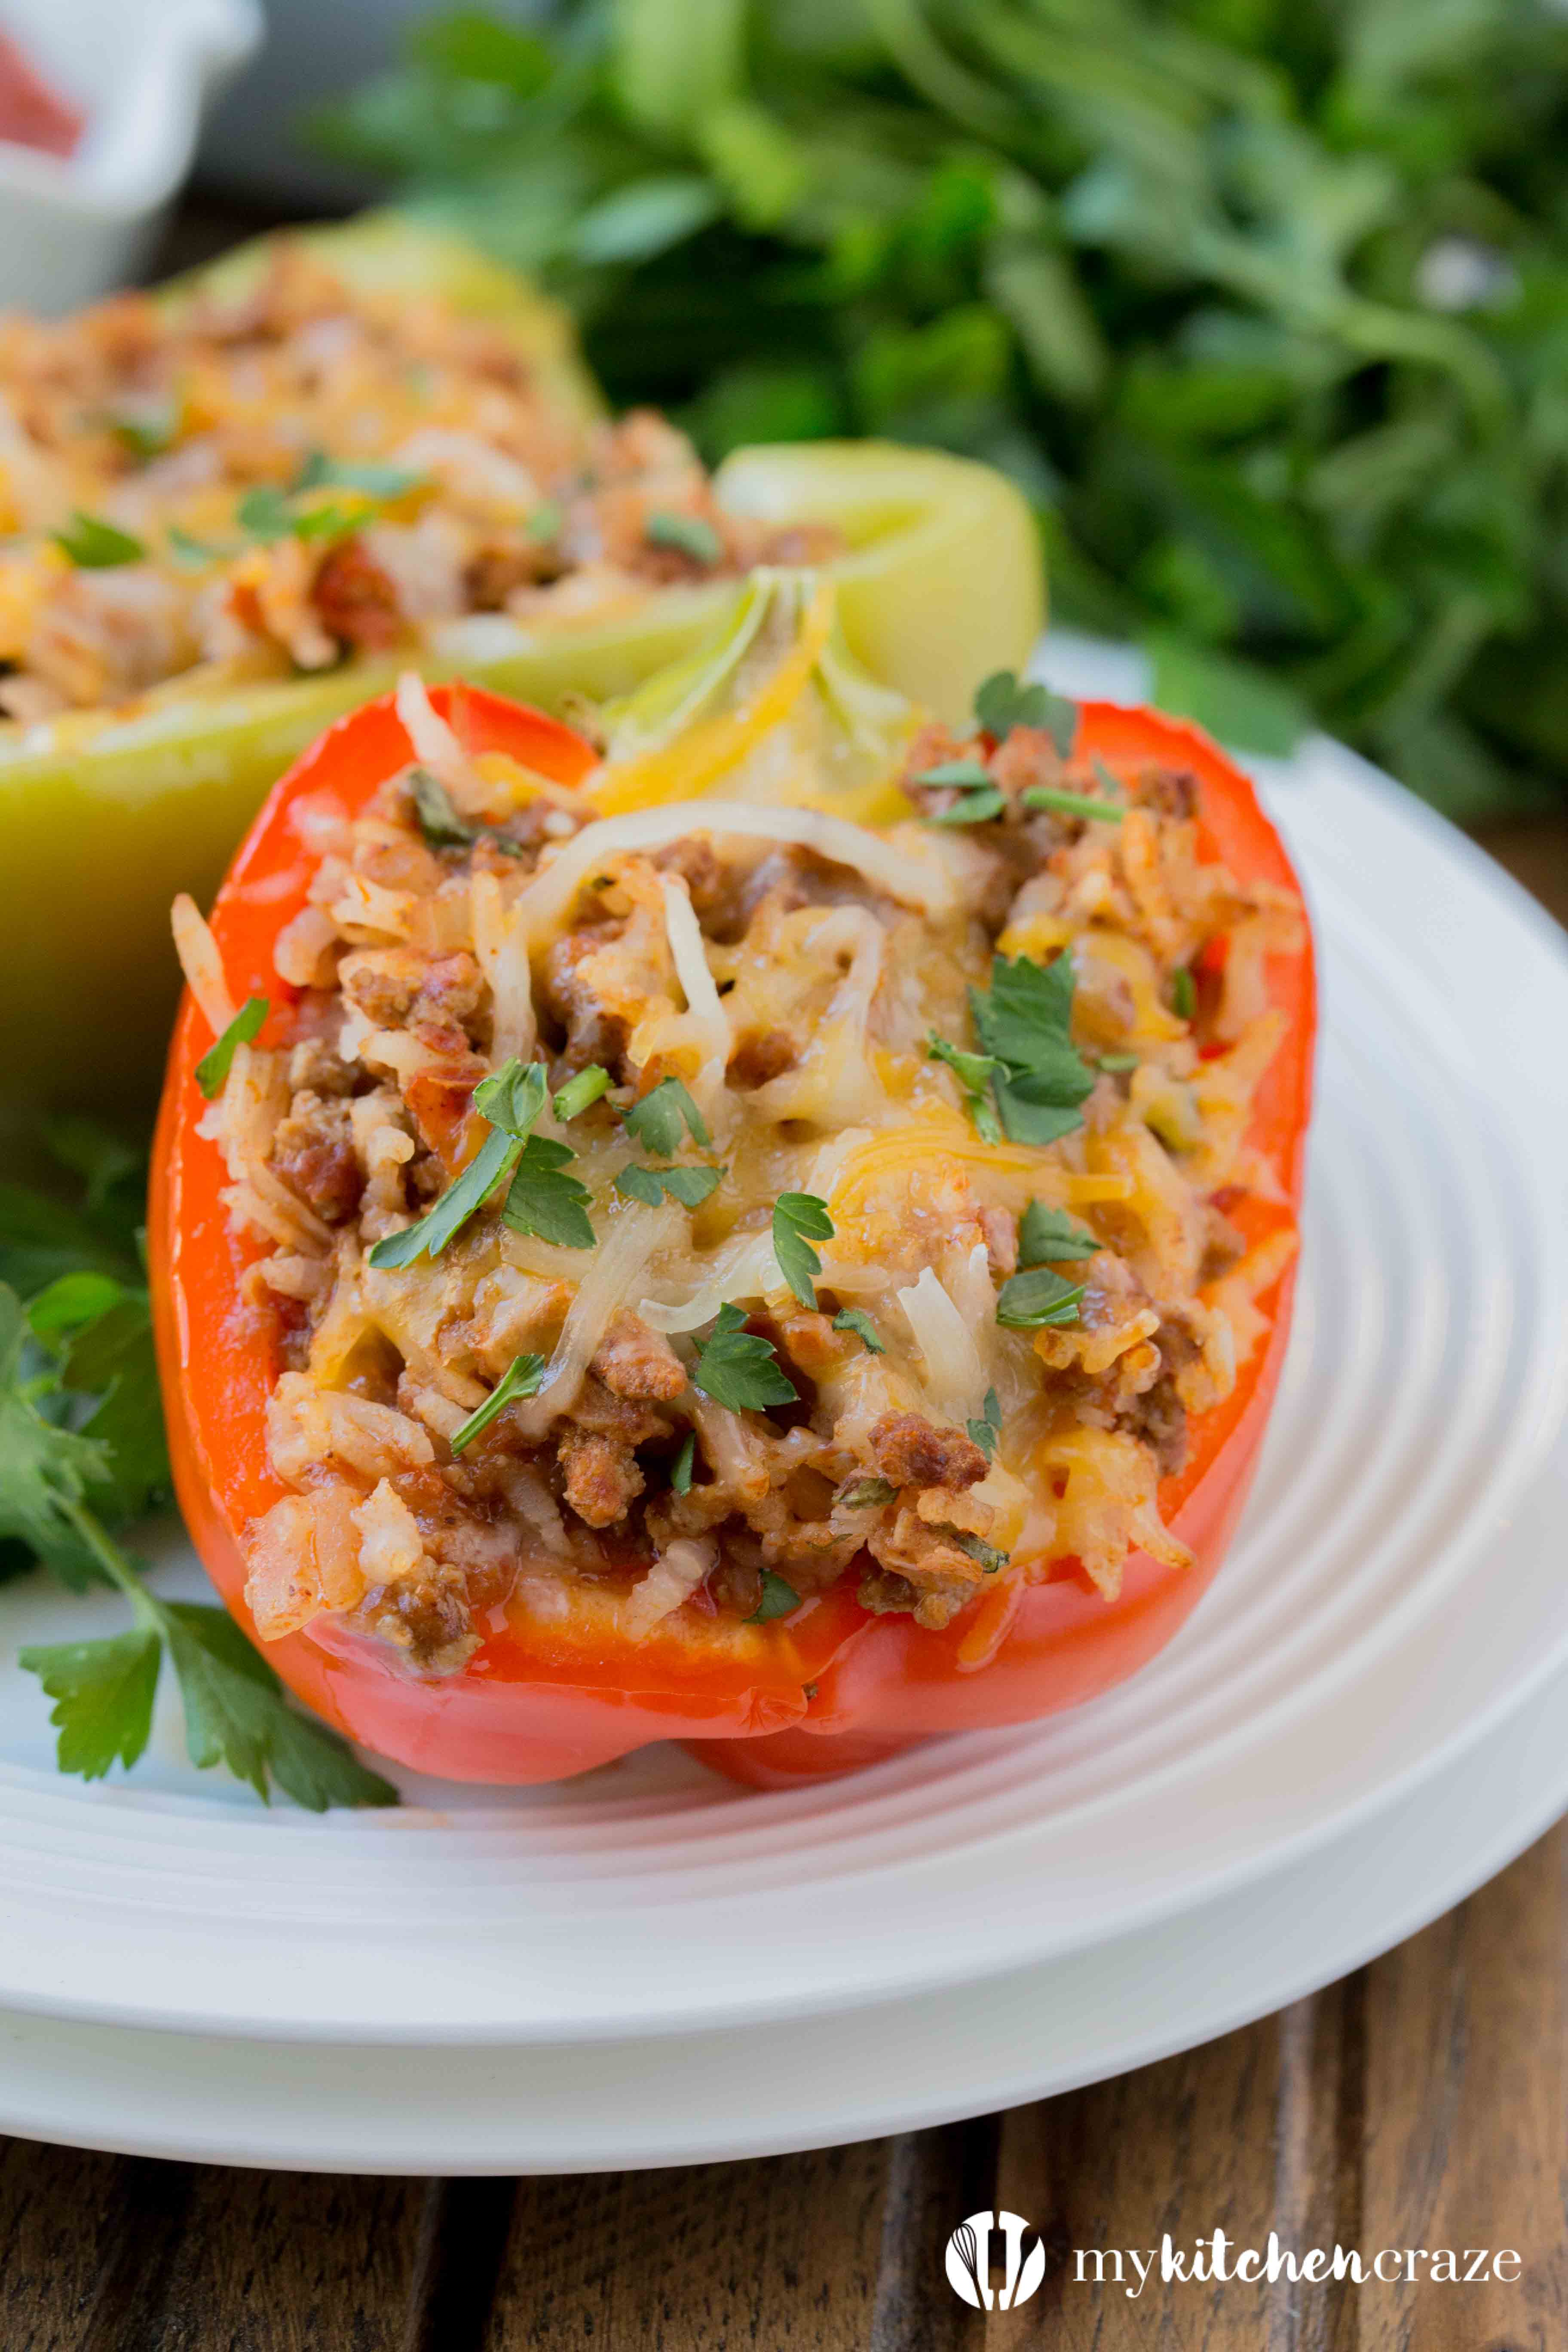 Stuffed Bell Peppers are a healthy and delicious dinner meal. Packed with delicious flavor, even the picky eaters will love them!